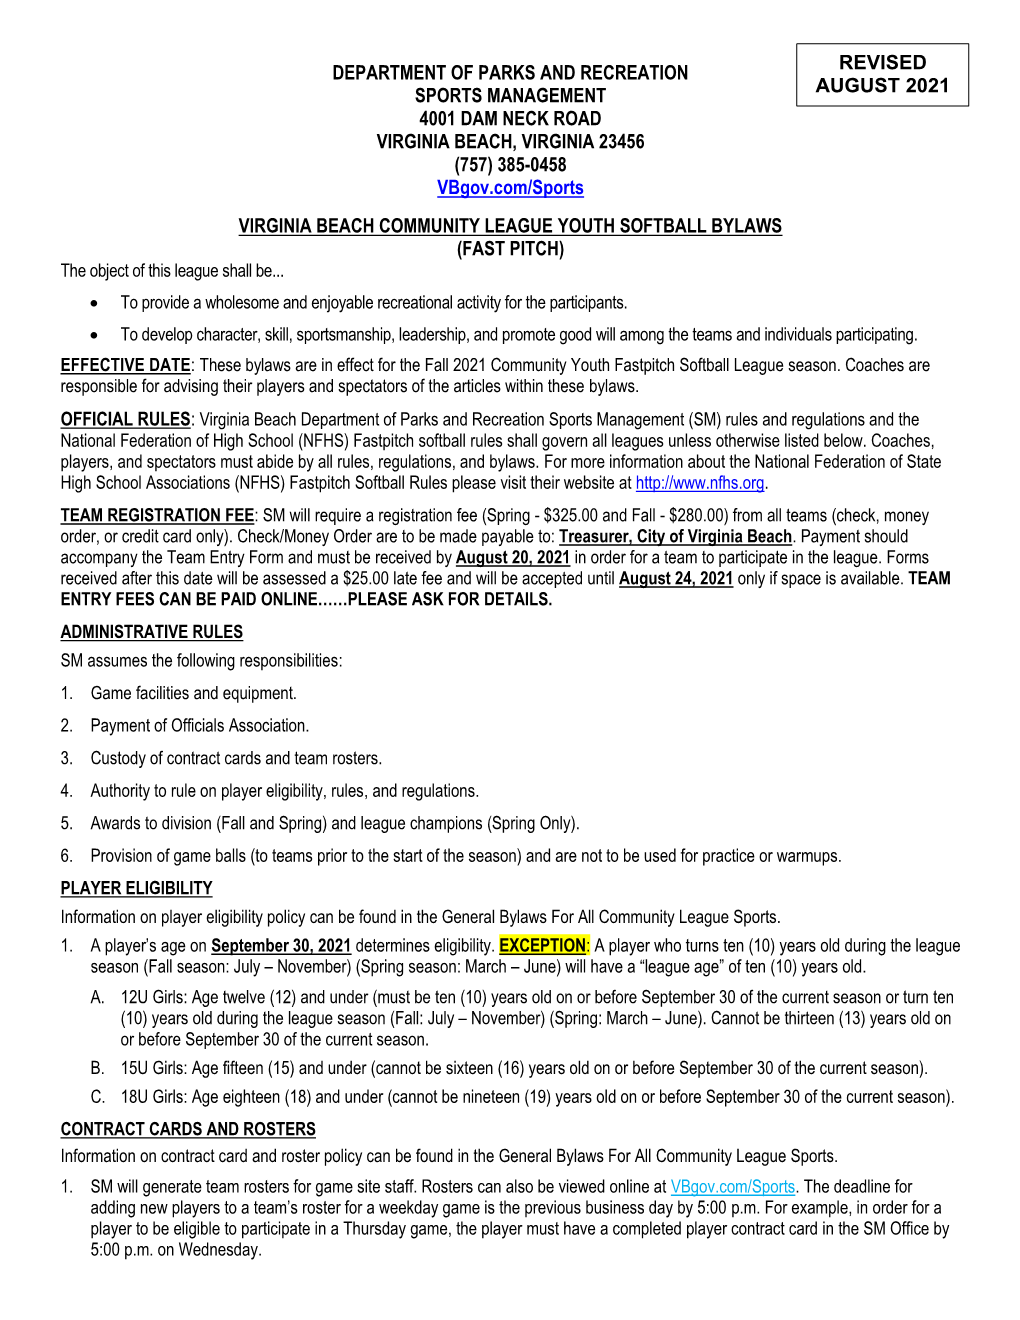 YOUTH SOFTBALL BYLAWS (FAST PITCH) the Object of This League Shall Be